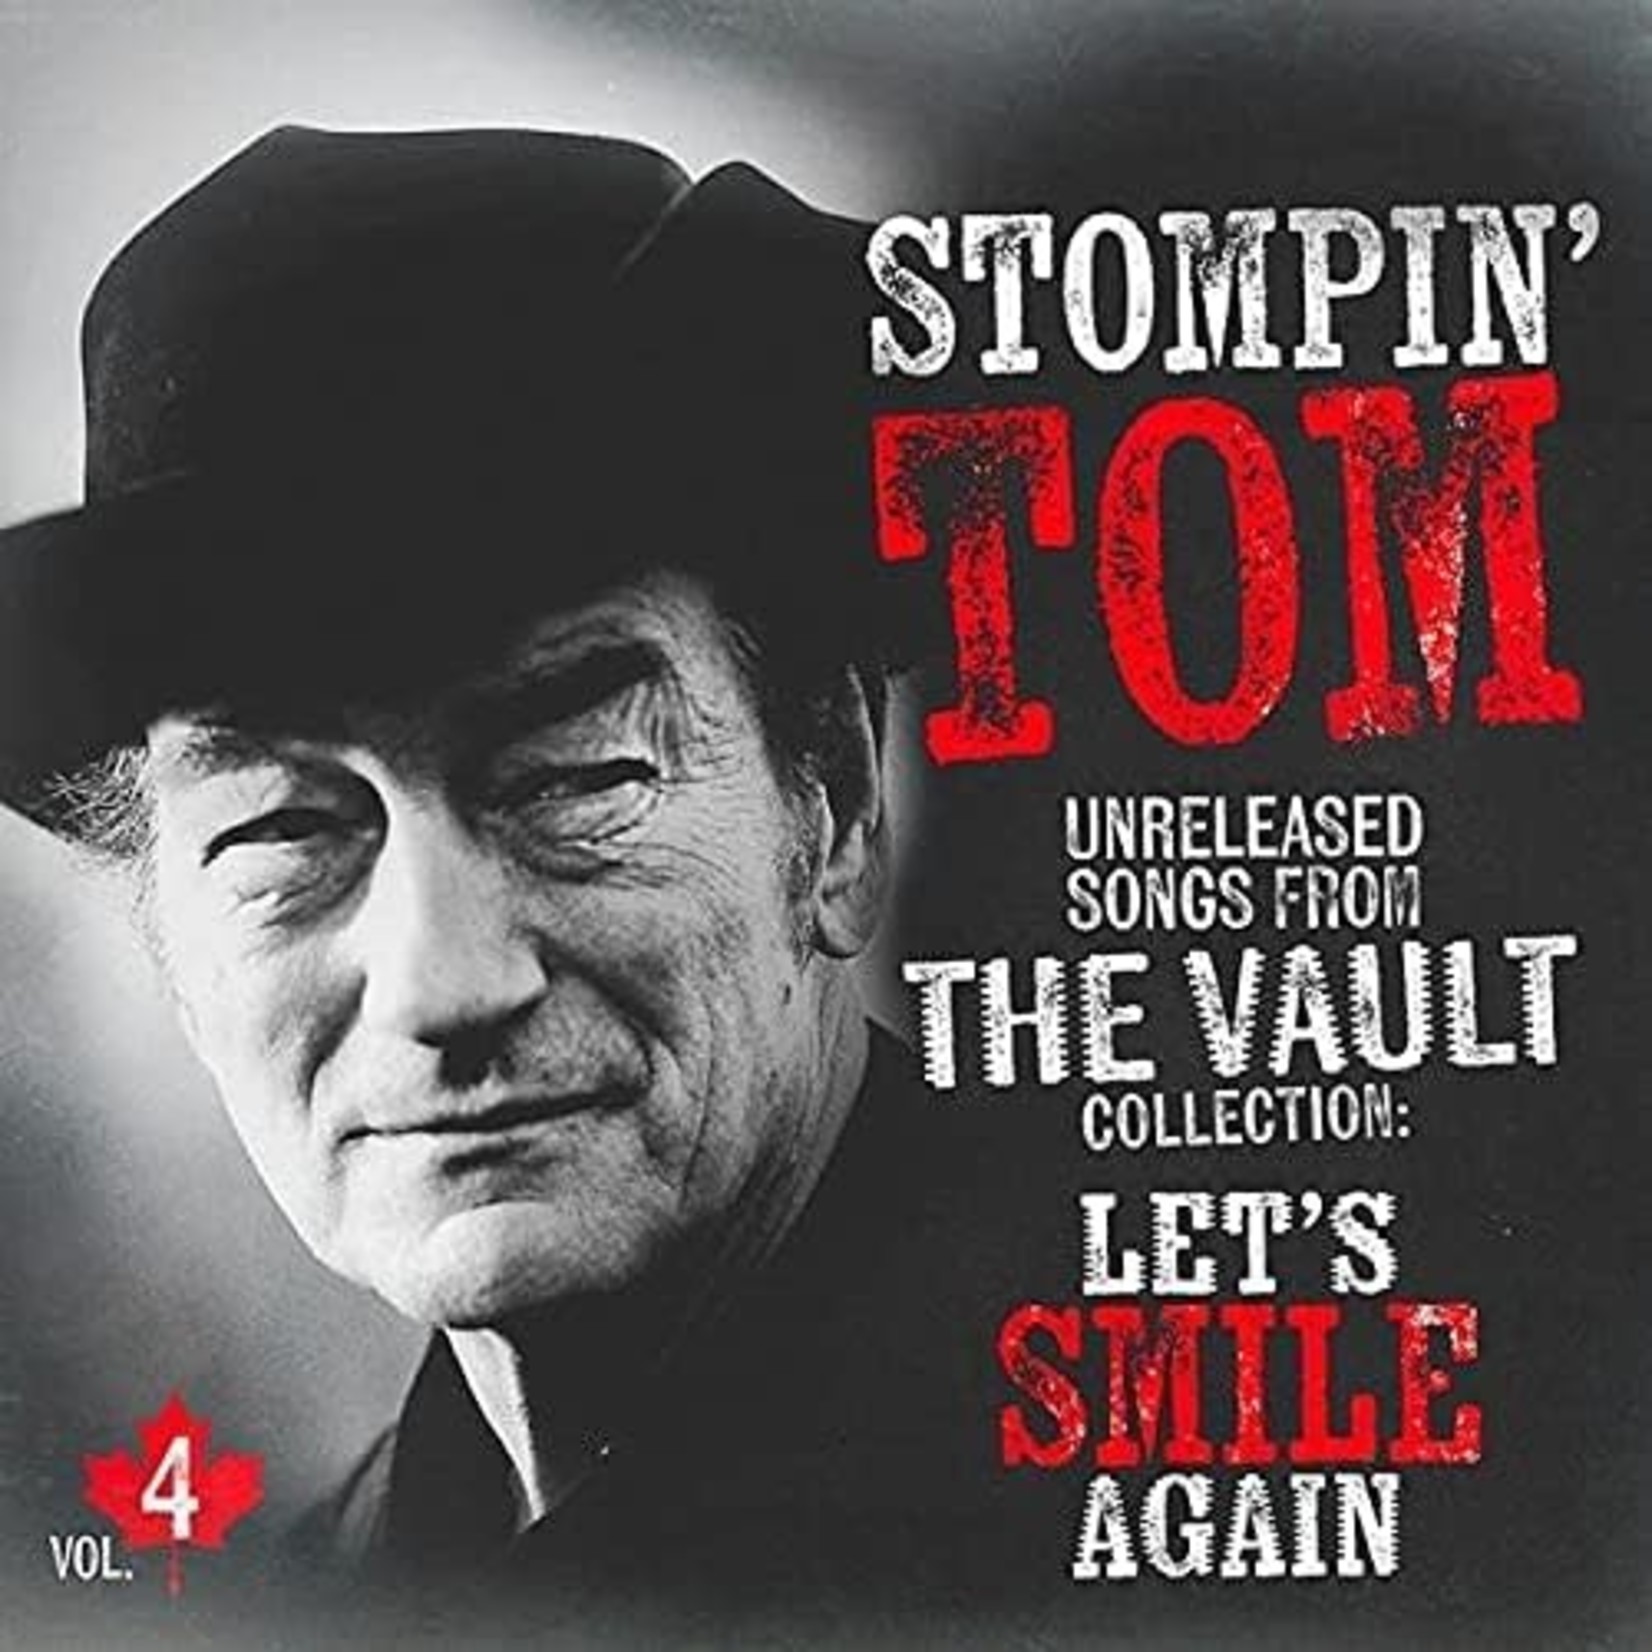 Stompin' Tom Connors - Unreleased Songs From The Vault Vol. 4: Let's Smile Again (Grey Vinyl) [LP]